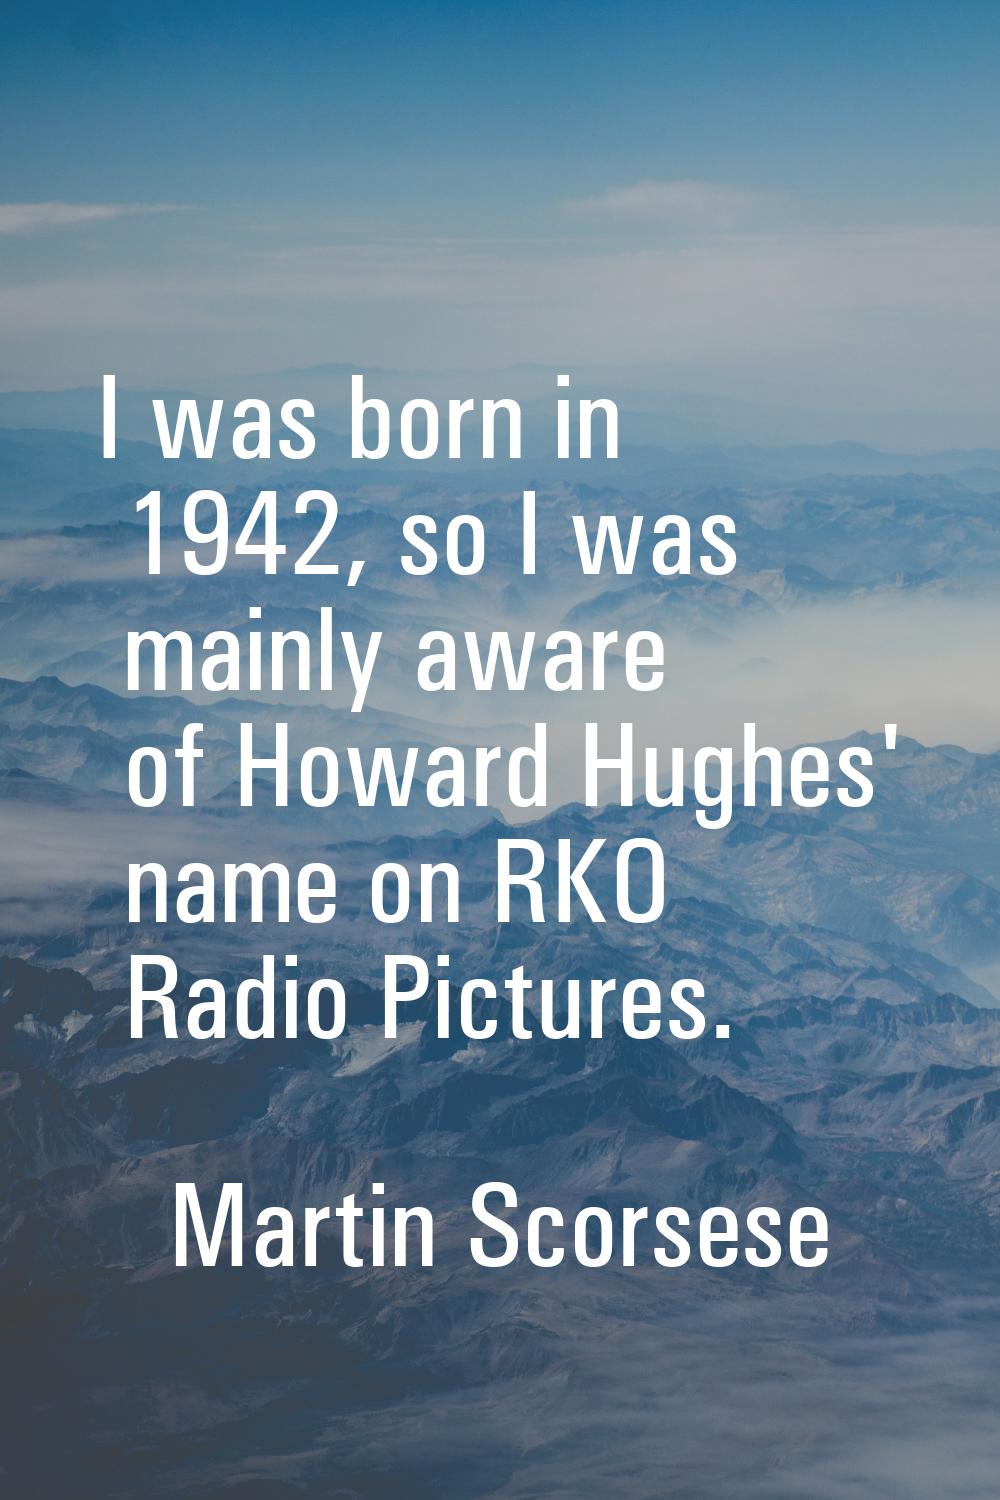 I was born in 1942, so I was mainly aware of Howard Hughes' name on RKO Radio Pictures.